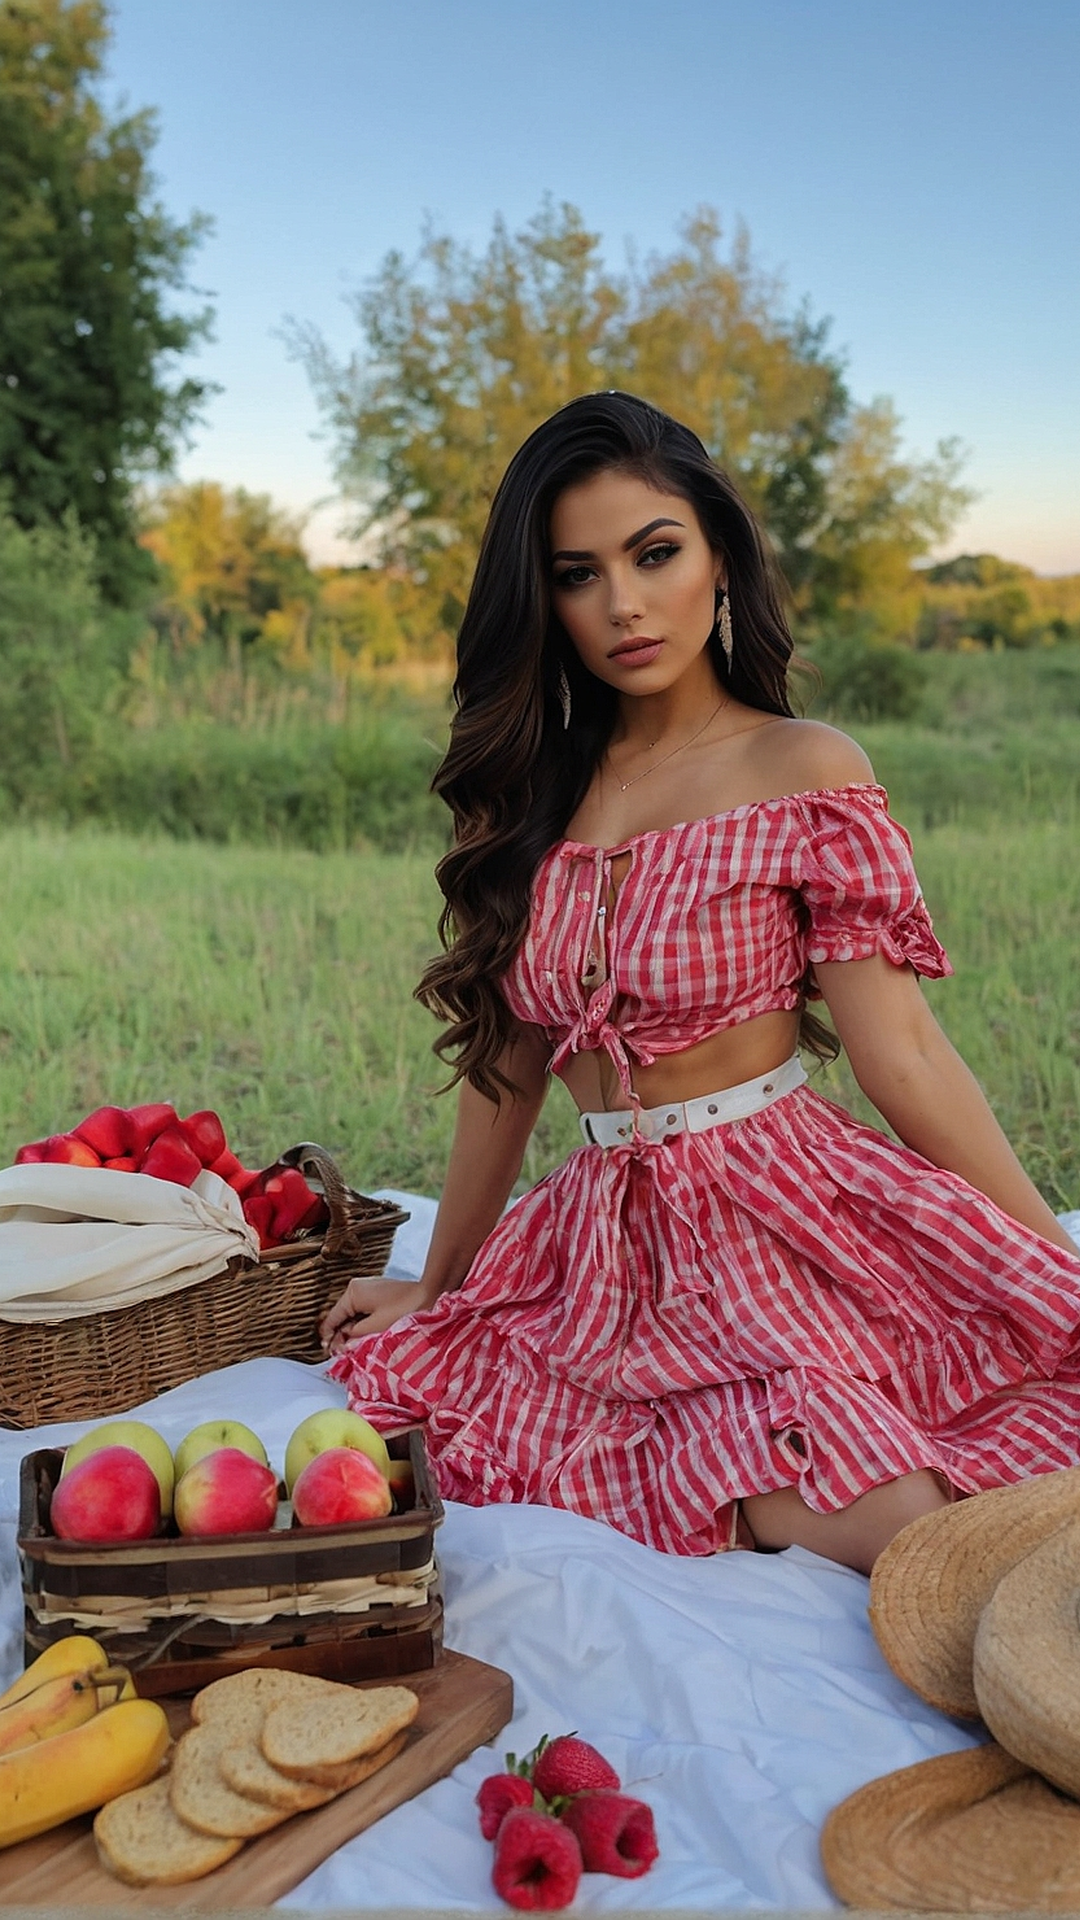 Outdoor Picnic Fashion Inspirations